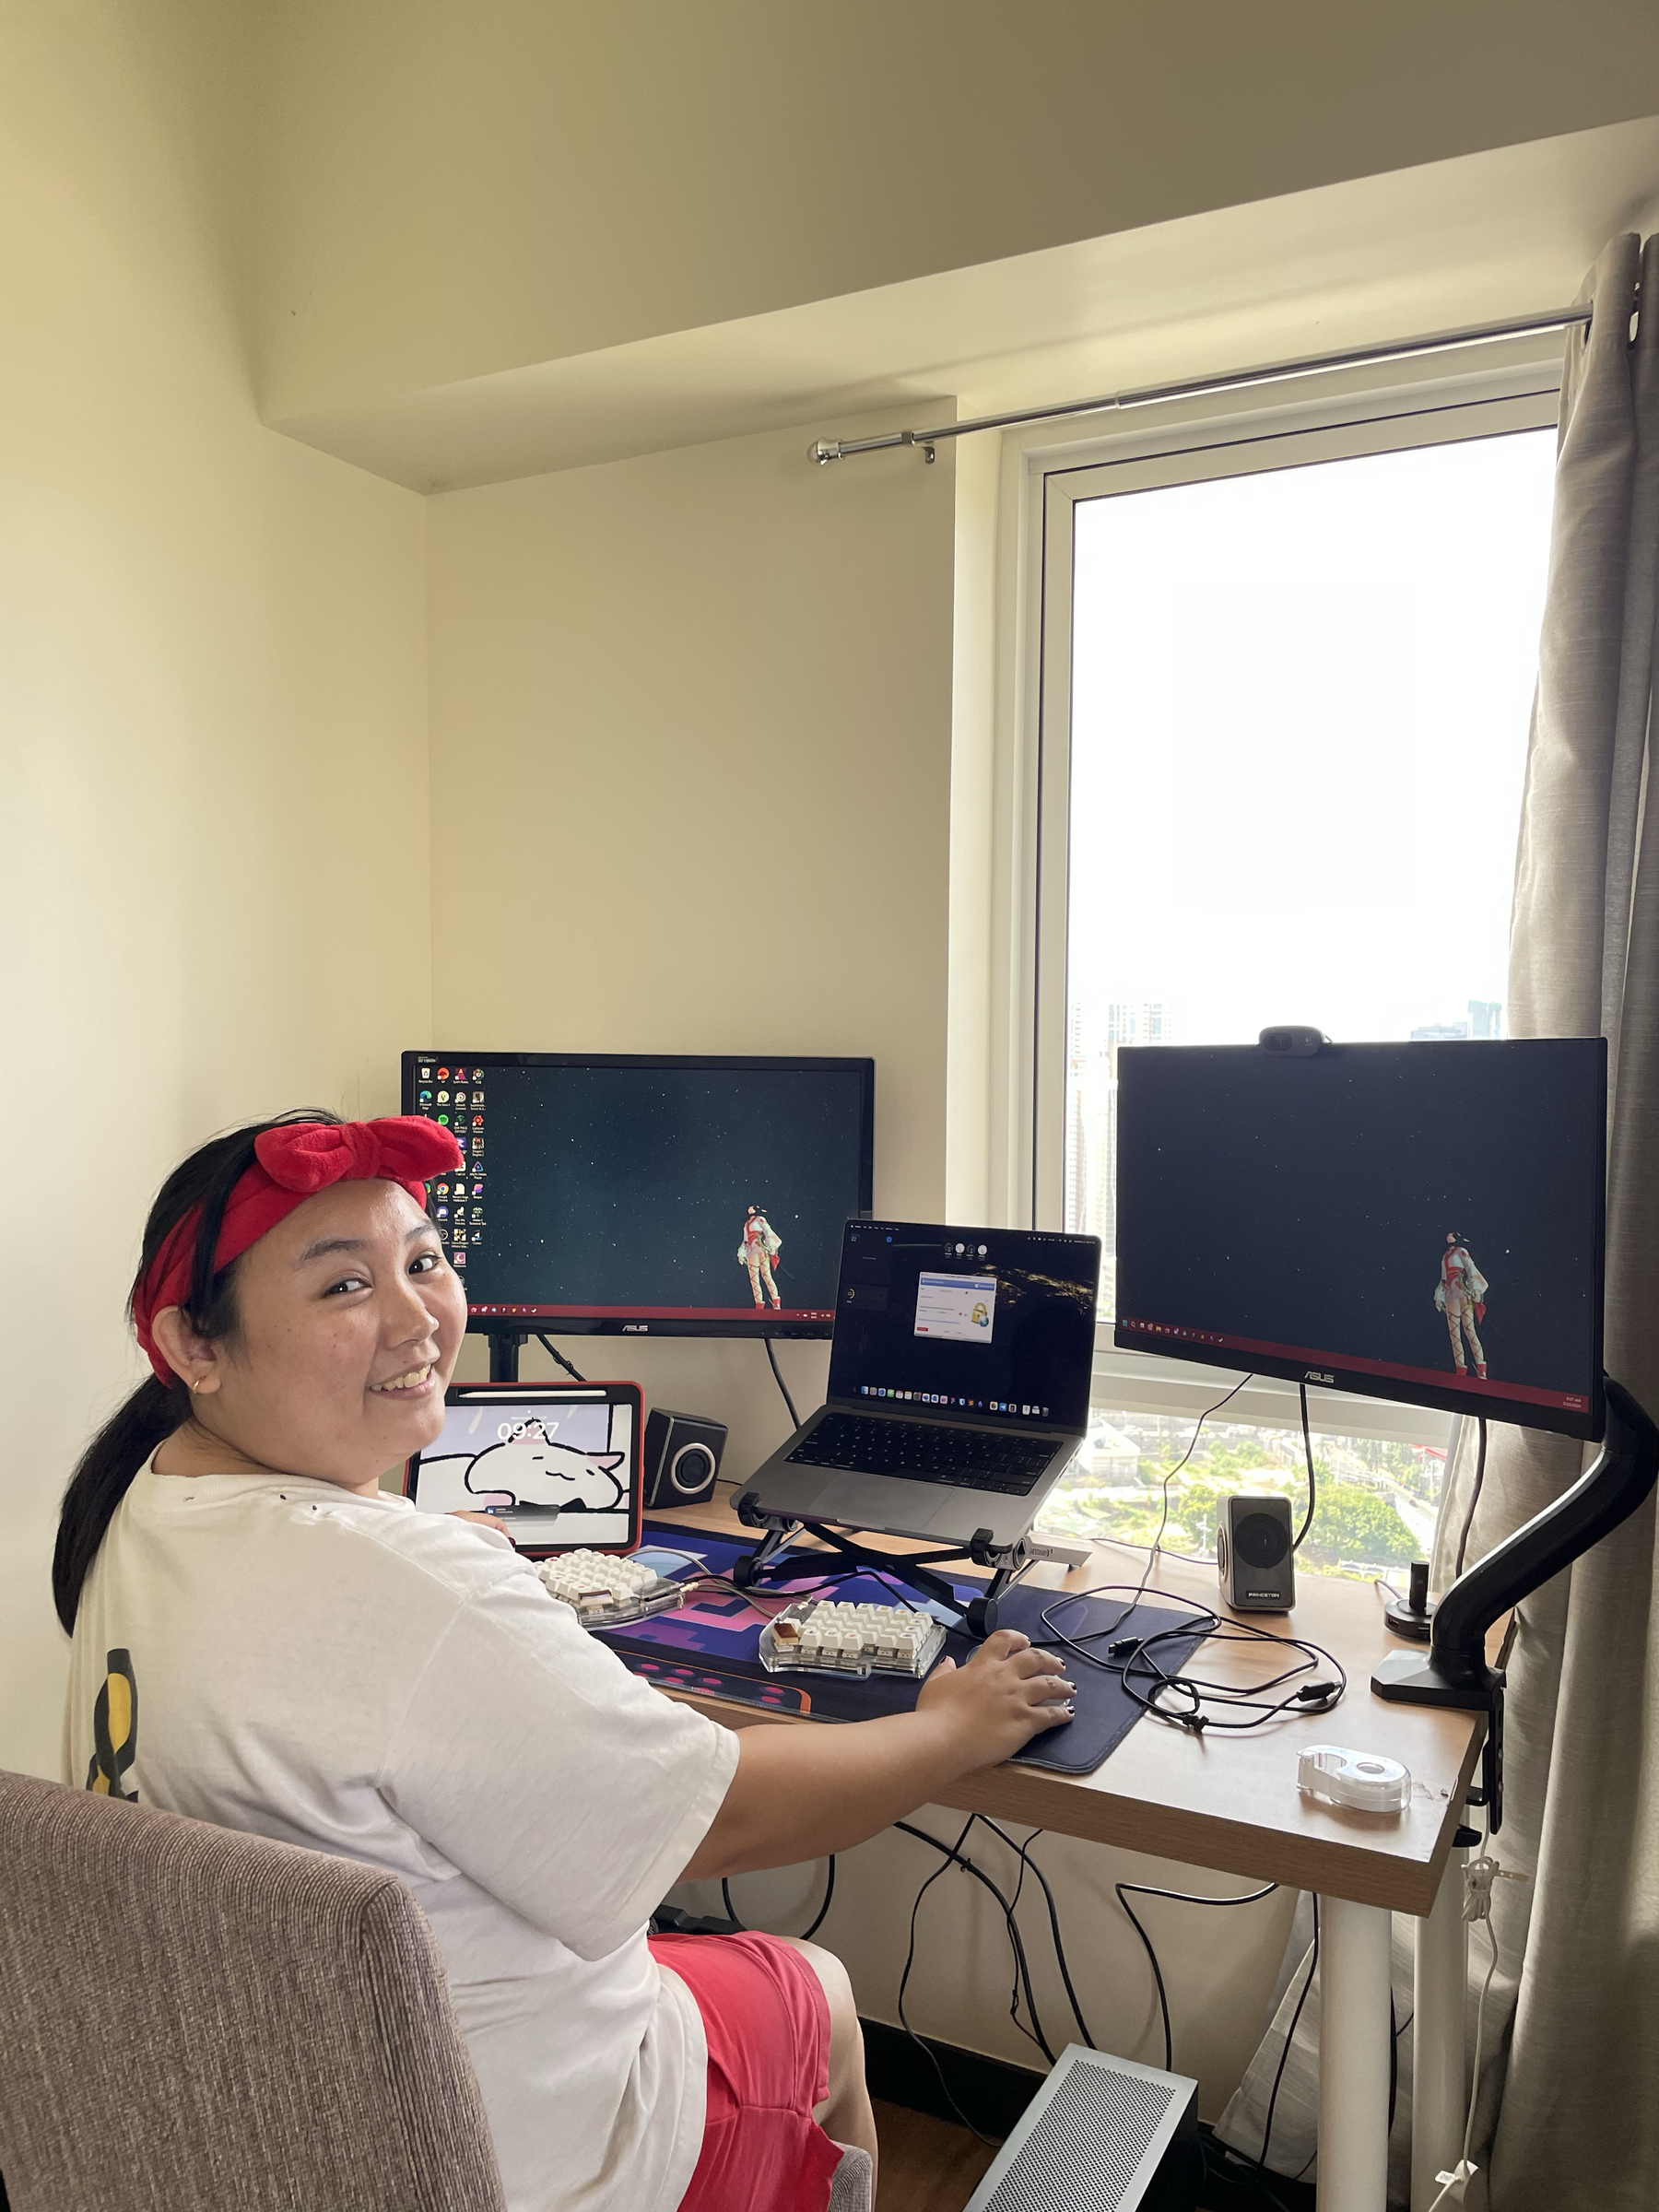 Chi looking at the camera and smiling while at her home workstation, consisting of two monitors mounted on monitor arms, an iPad propped up, and a Macbook Pro elevated with a laptop stand in the middle of her two monitors. On her desk is her split keyboard, her trackball mouse which Chi is holding, and a full deskmat. The chair Chi is sitting on is still a normal dining chair, not her computer chair. Her setup is facing the window, letting natural light in.